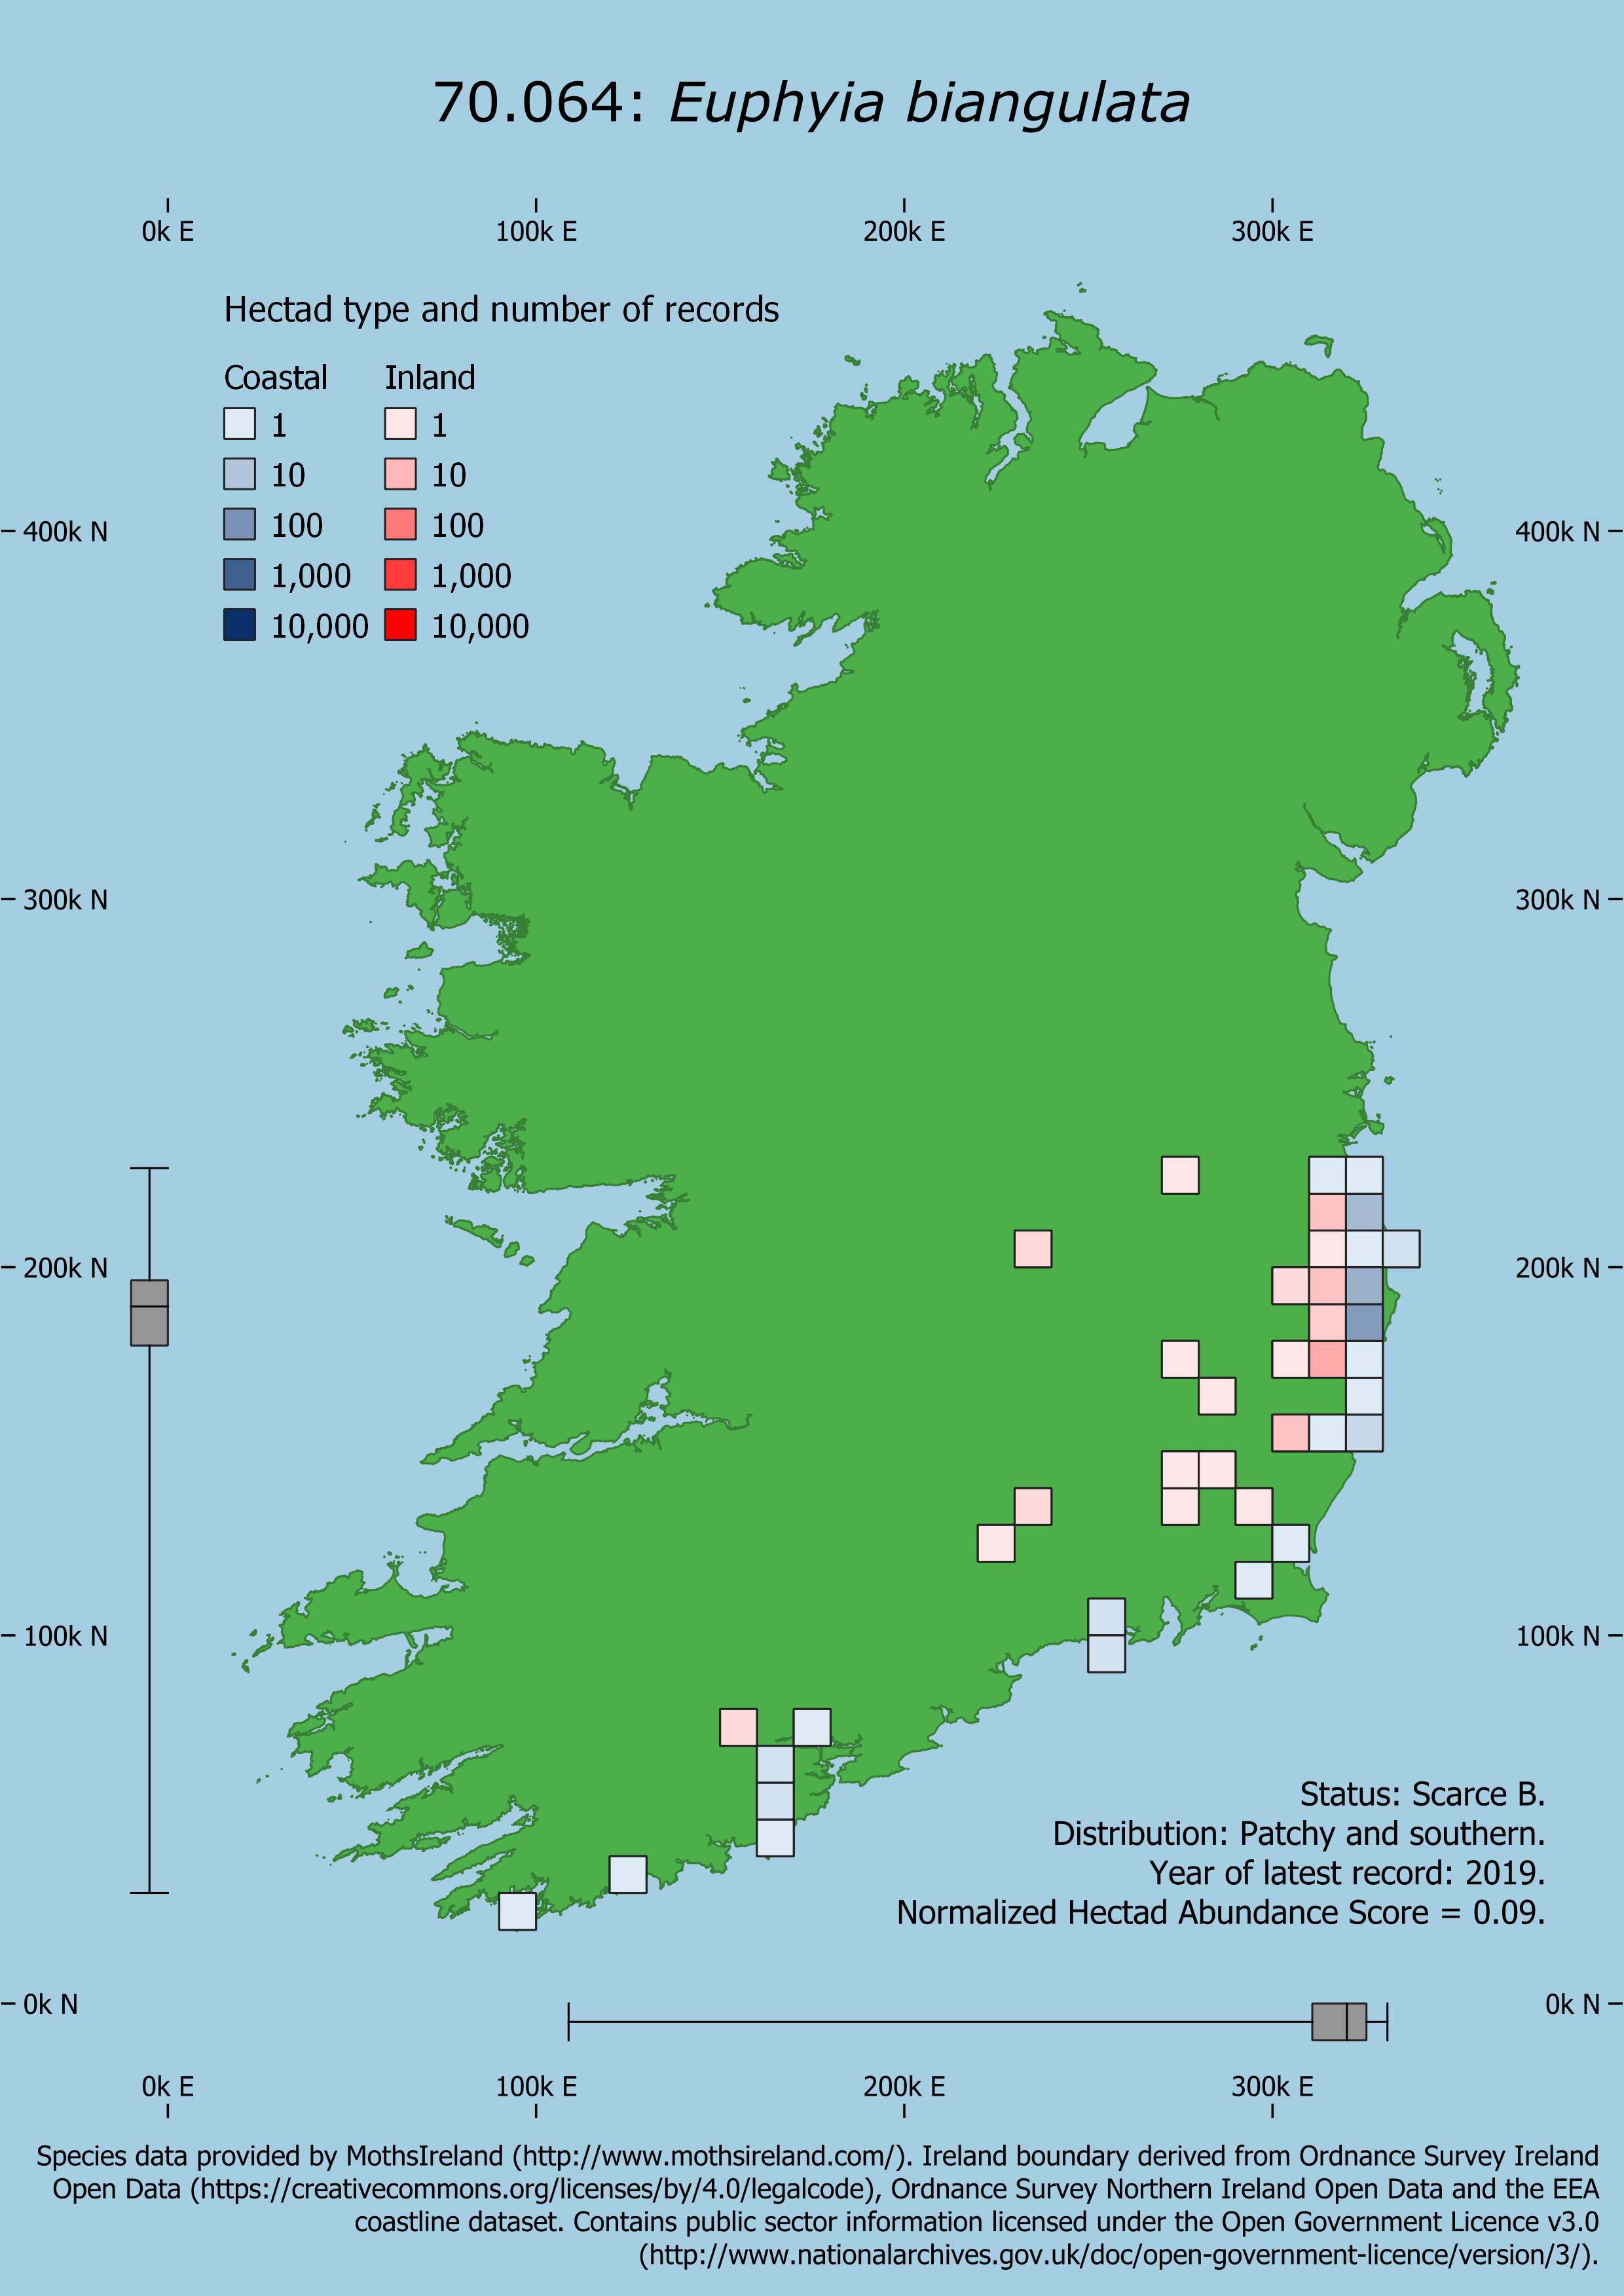 Example invertebrate status distribution map for the Cloaked Carpet moth Euphyia biangulata in Ireland